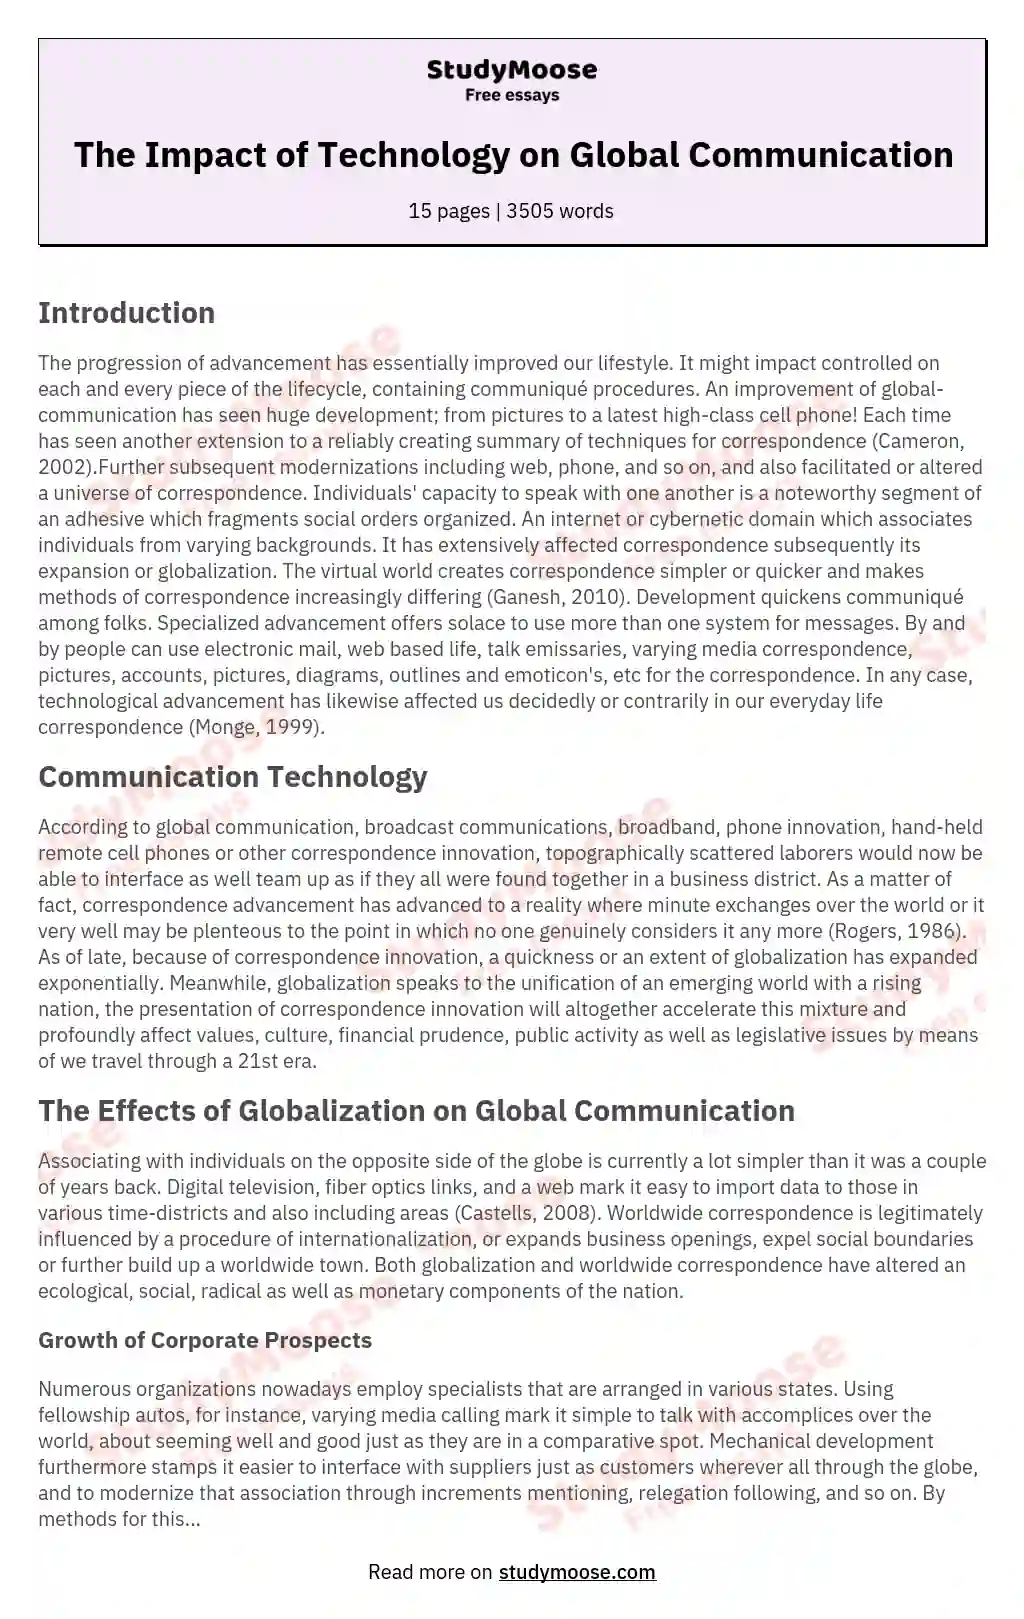 effects of technology on communication essay